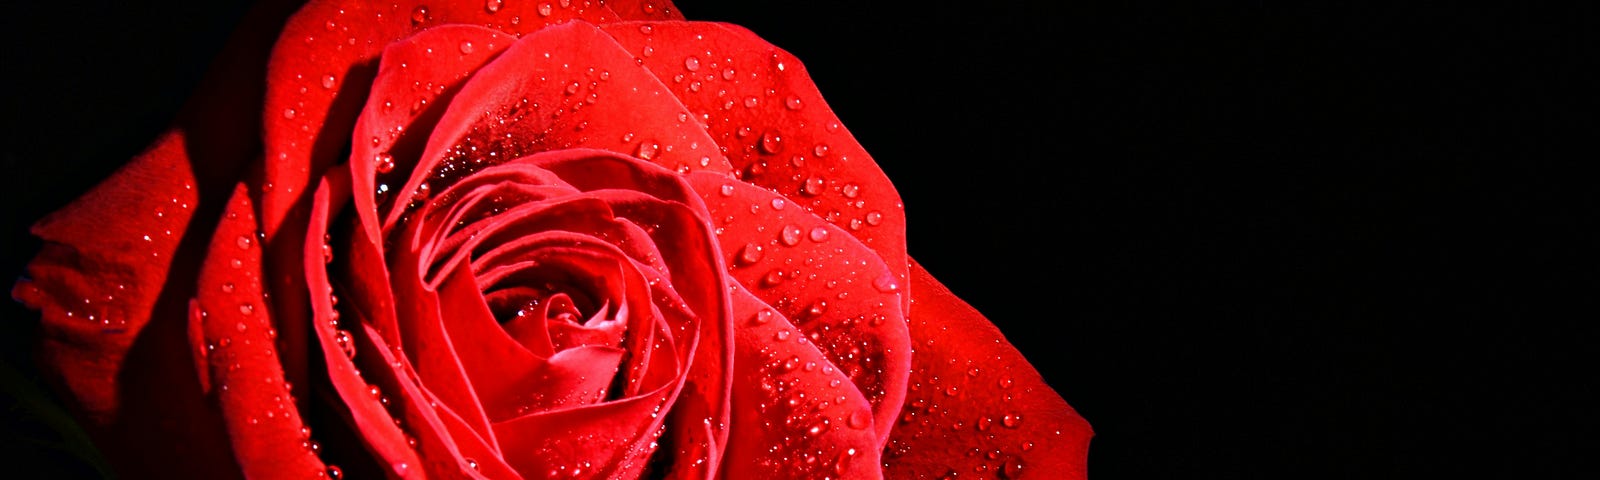 A Beautiful Red Rose With Dewdrops on its Petals in a Dark Background